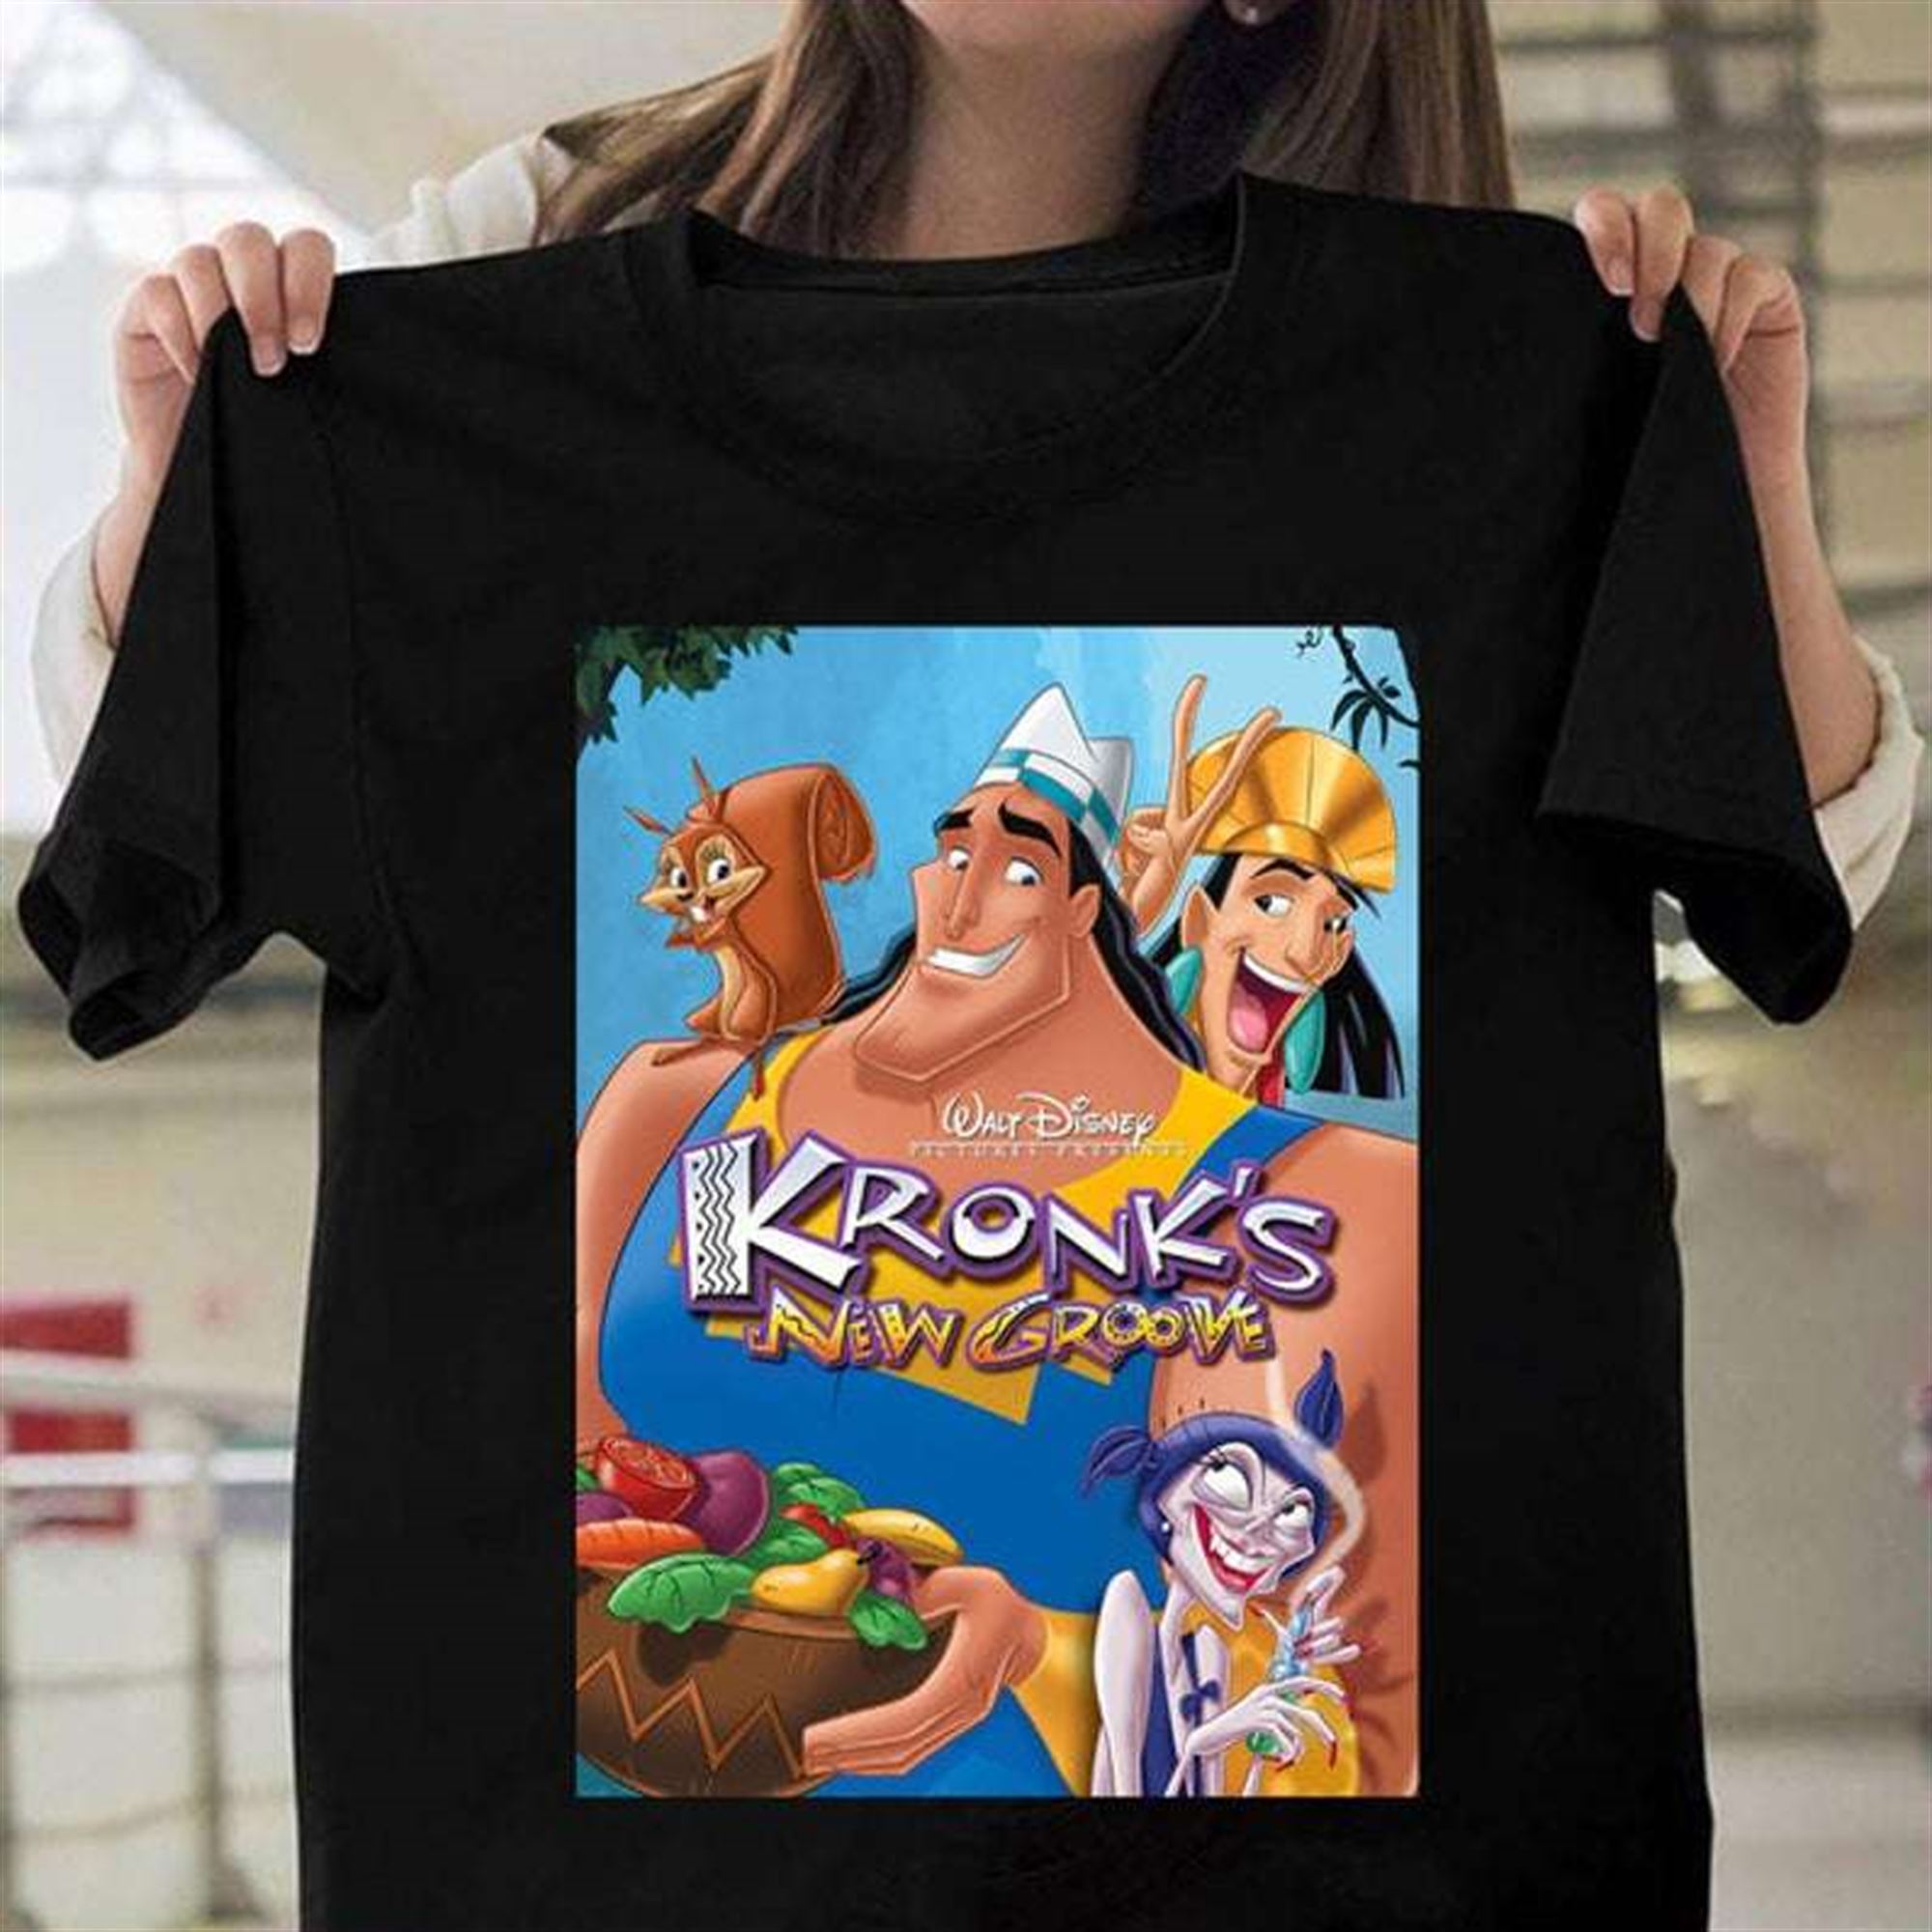 Disney Kronks New Groove T Shirt Plus Size Up To 5x